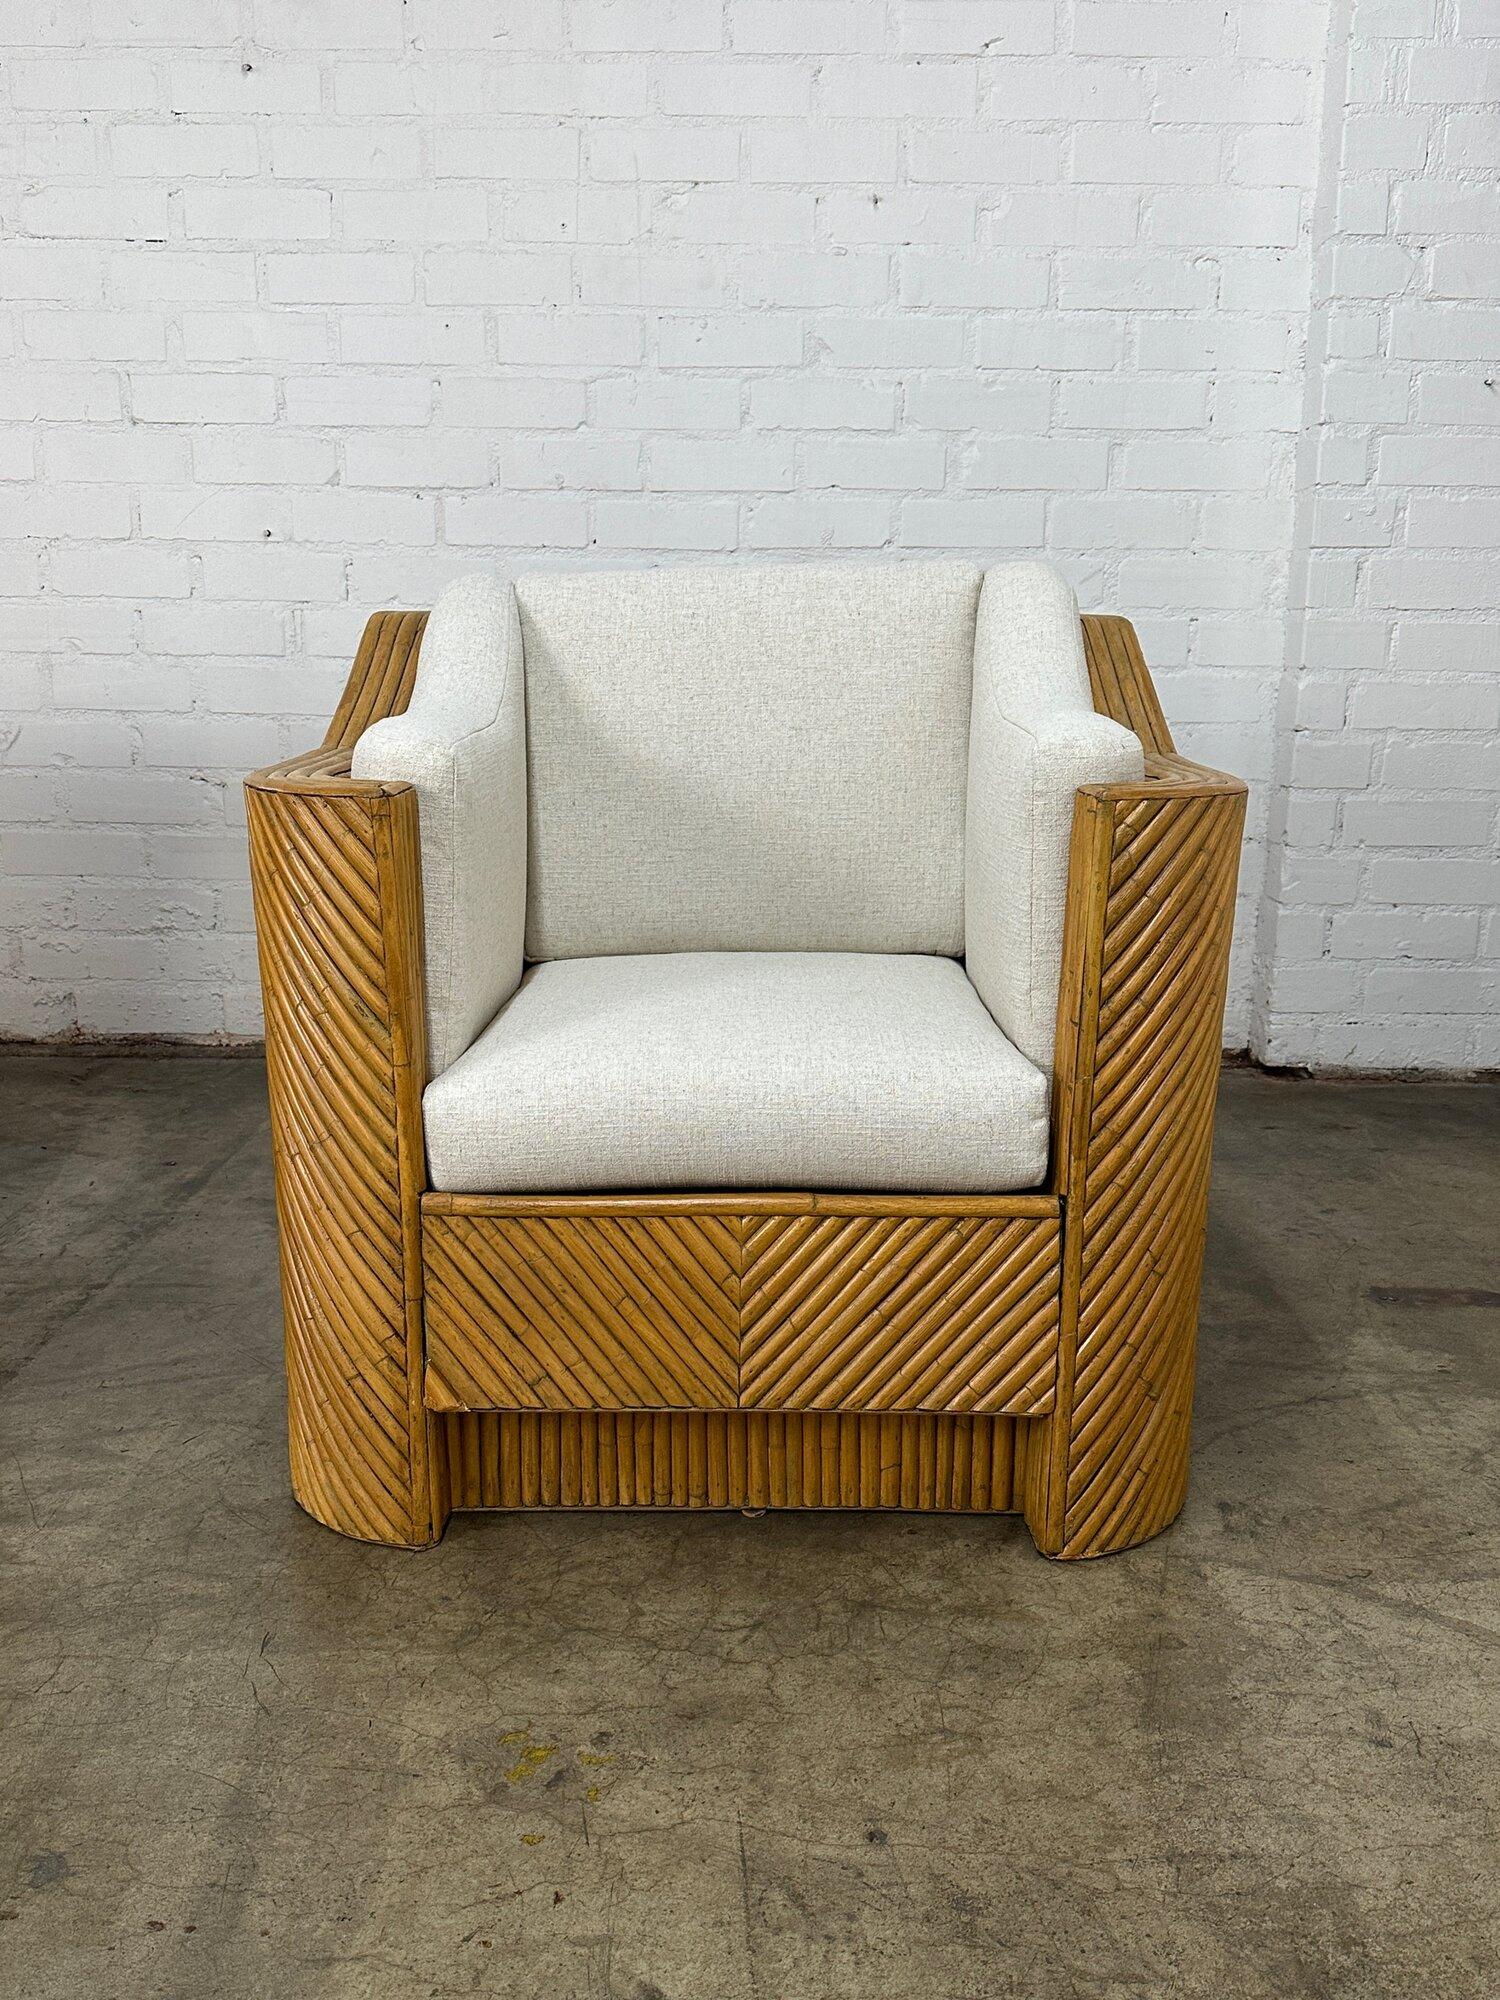 Vintage Bamboo Rattan Lounge Chair- Sold Separately For Sale 1